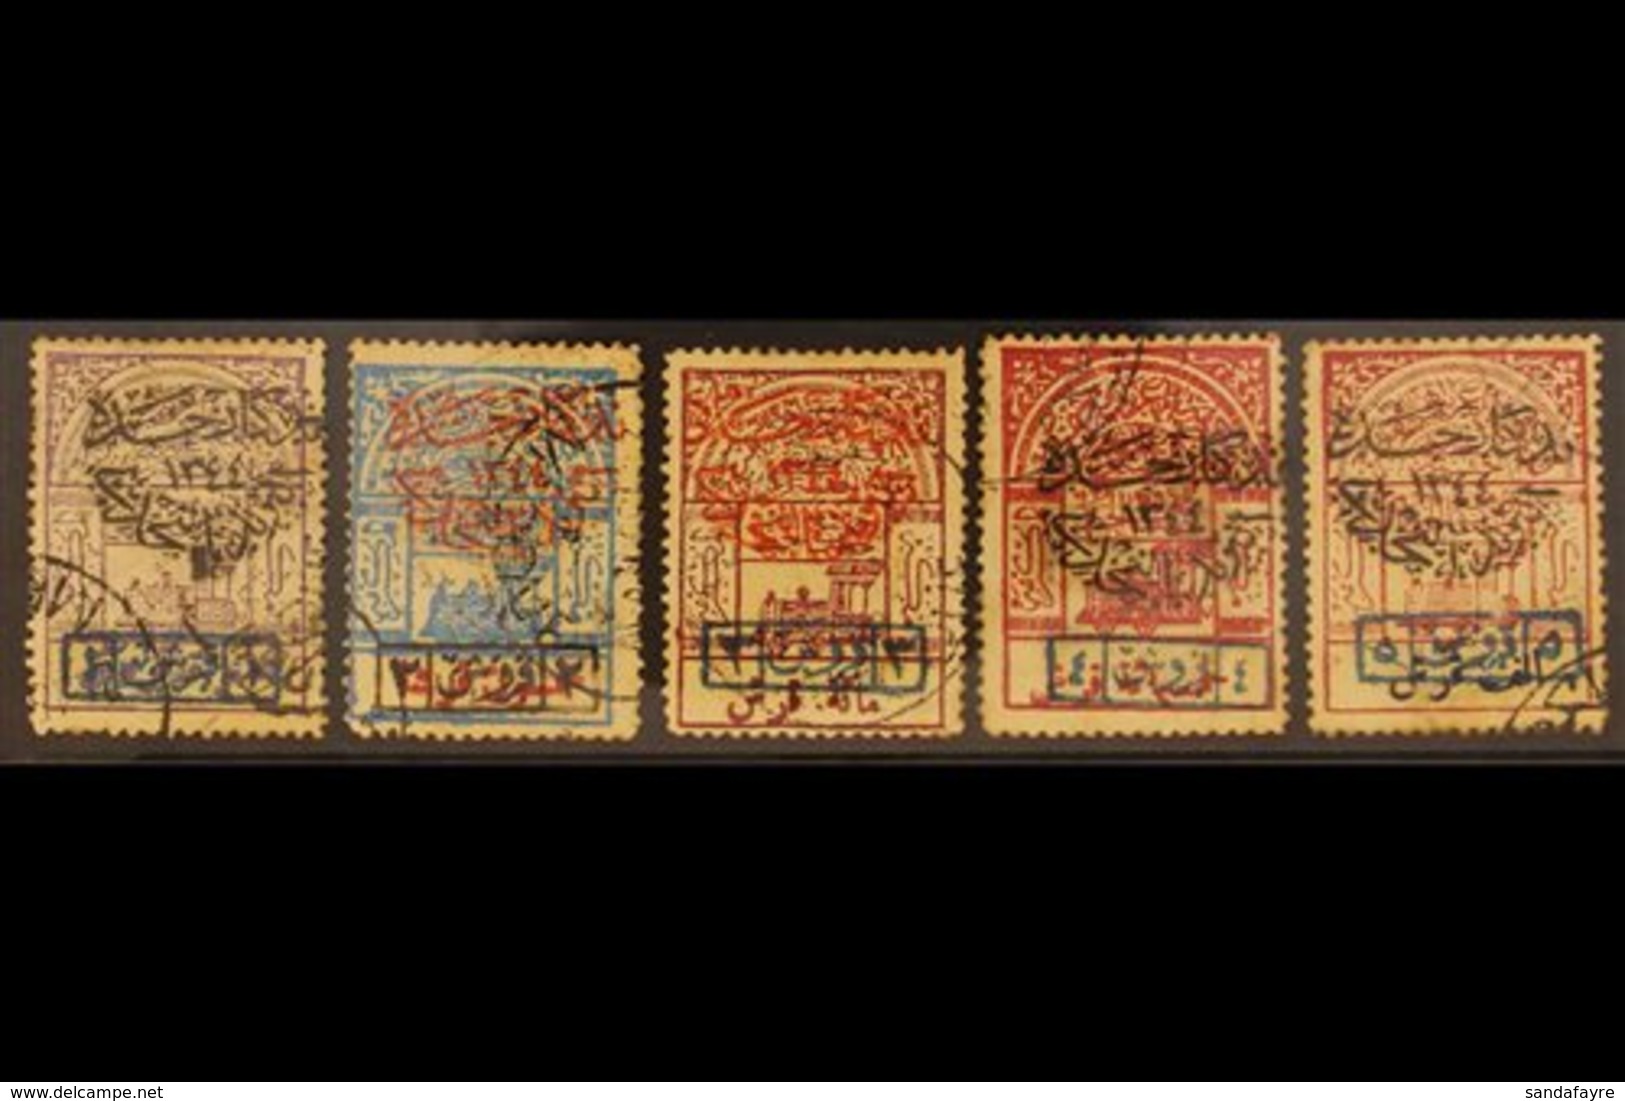 1925 (23 DEC) Capture Of Jeddah Complete Handstamped Set On Railway Tax Stamps, SG 249/253, Cto Used With Gum Toning, 2p - Arabie Saoudite